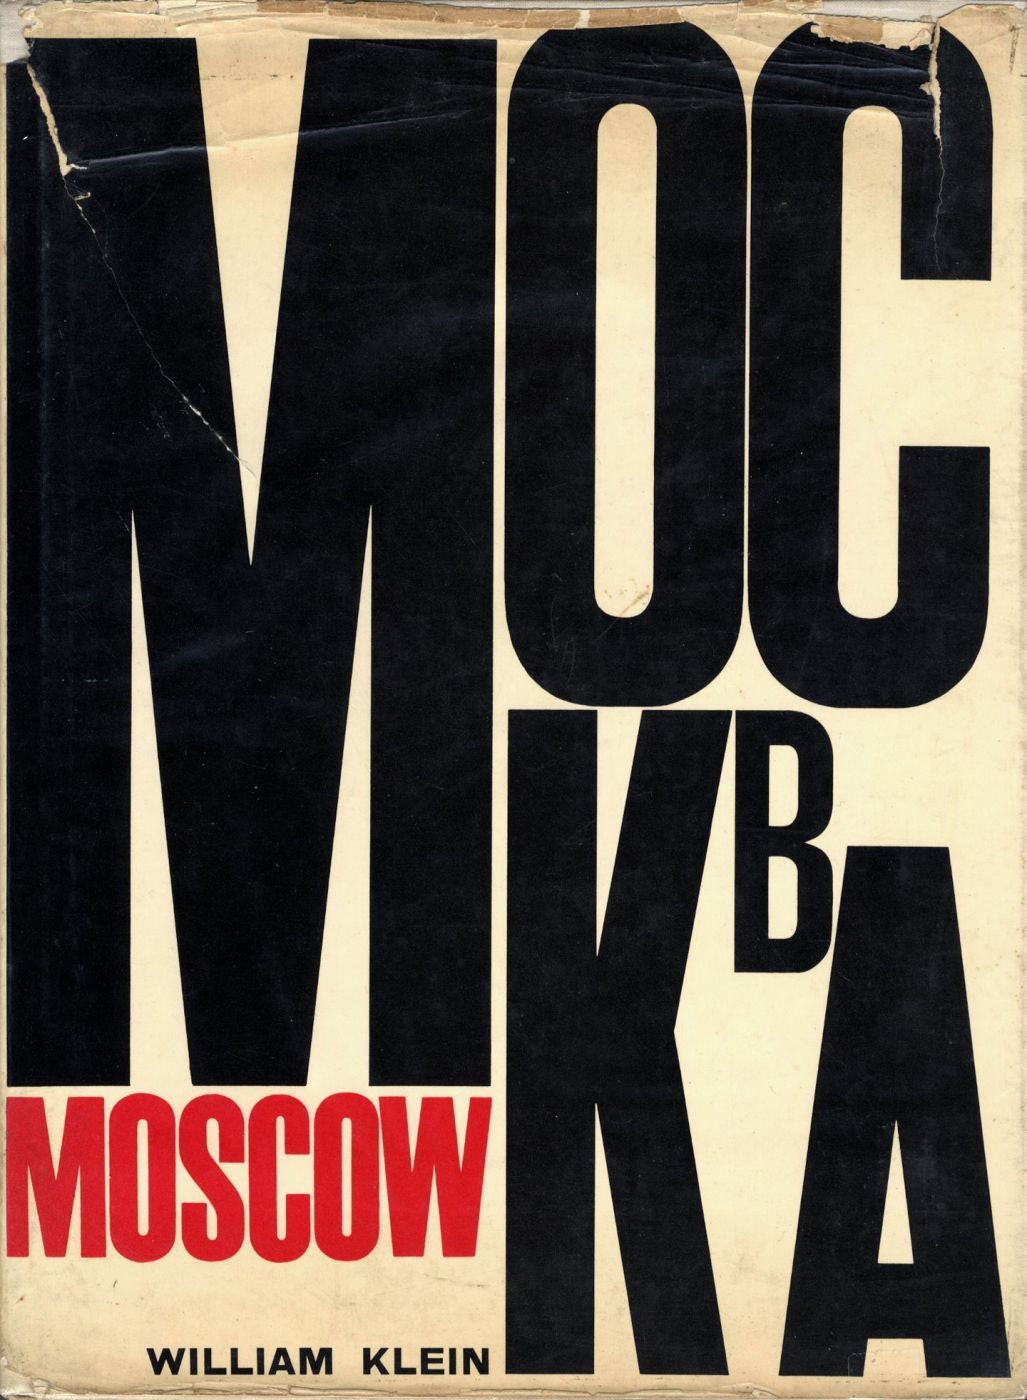 William Klein: Moscow / Mockba (First English Edition) [SIGNED]